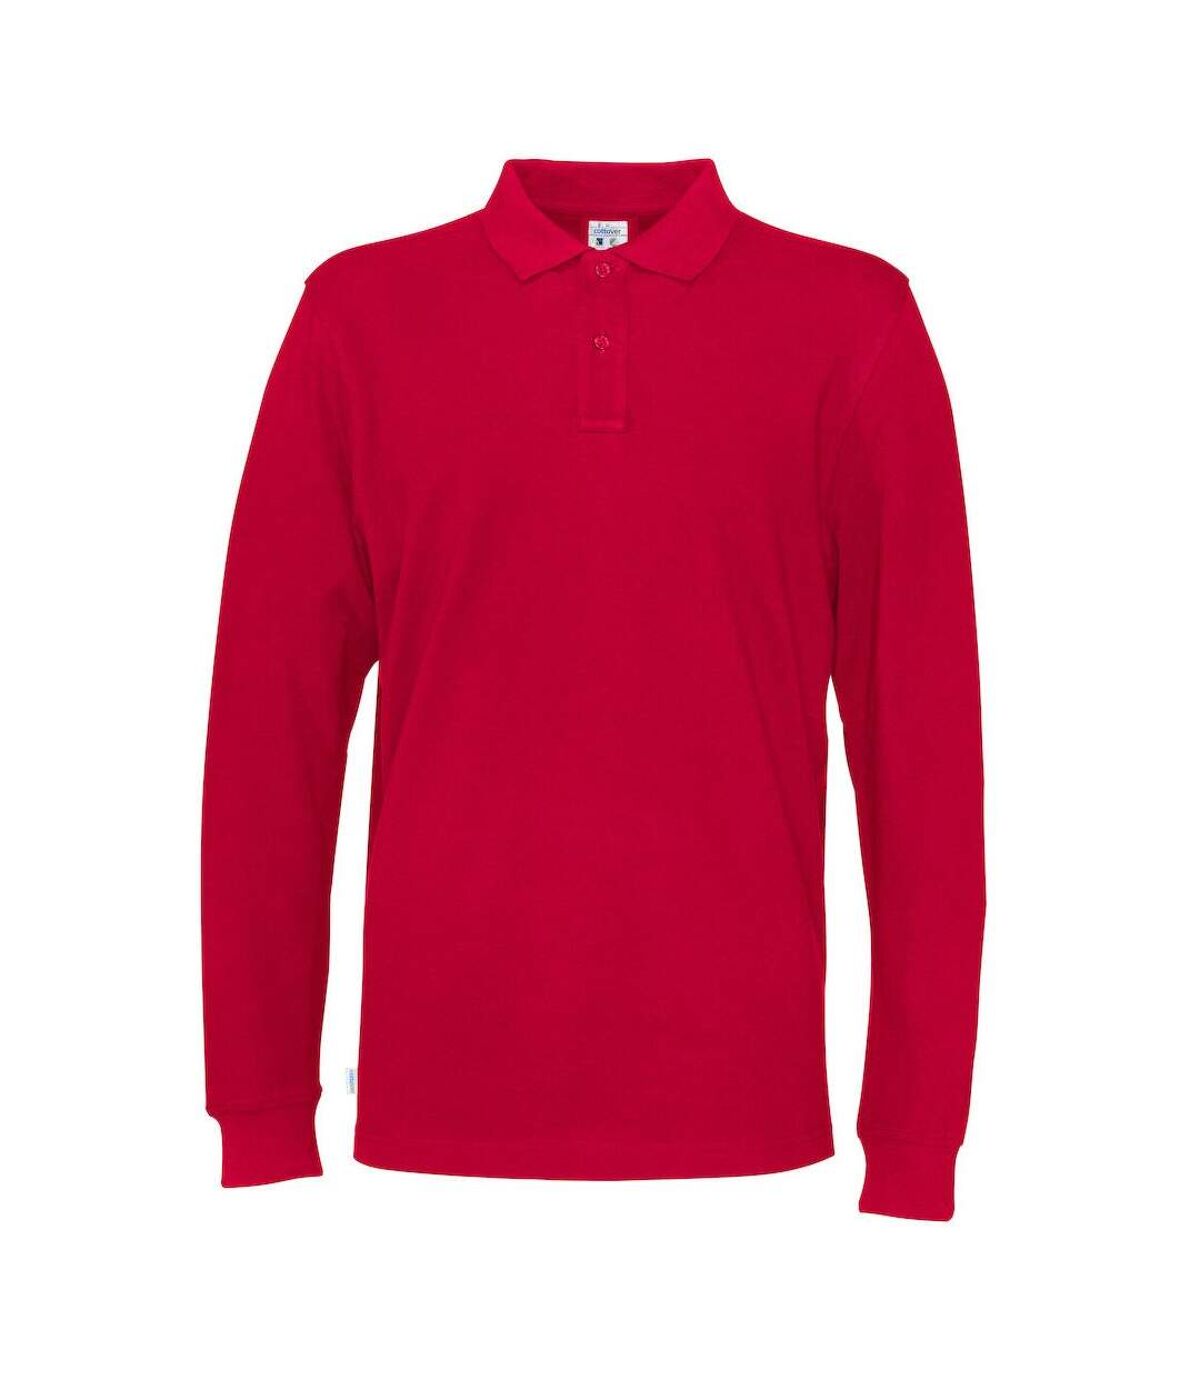 Cottover - T-shirt - Homme (Rouge) - UTUB525